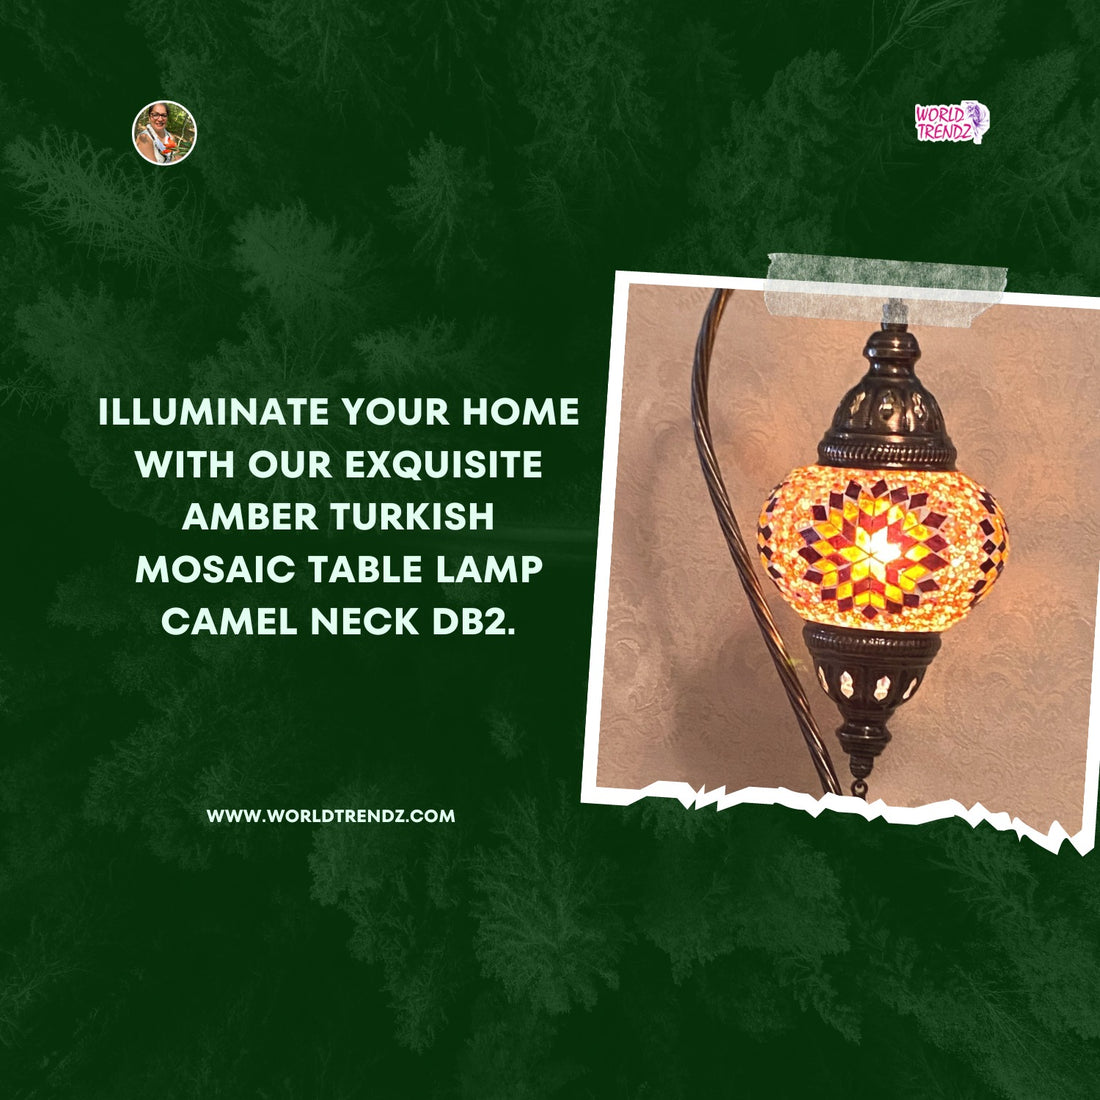 Illuminate Your Space with the Exquisite Amber Turkish Mosaic Table Lamp Camel Neck